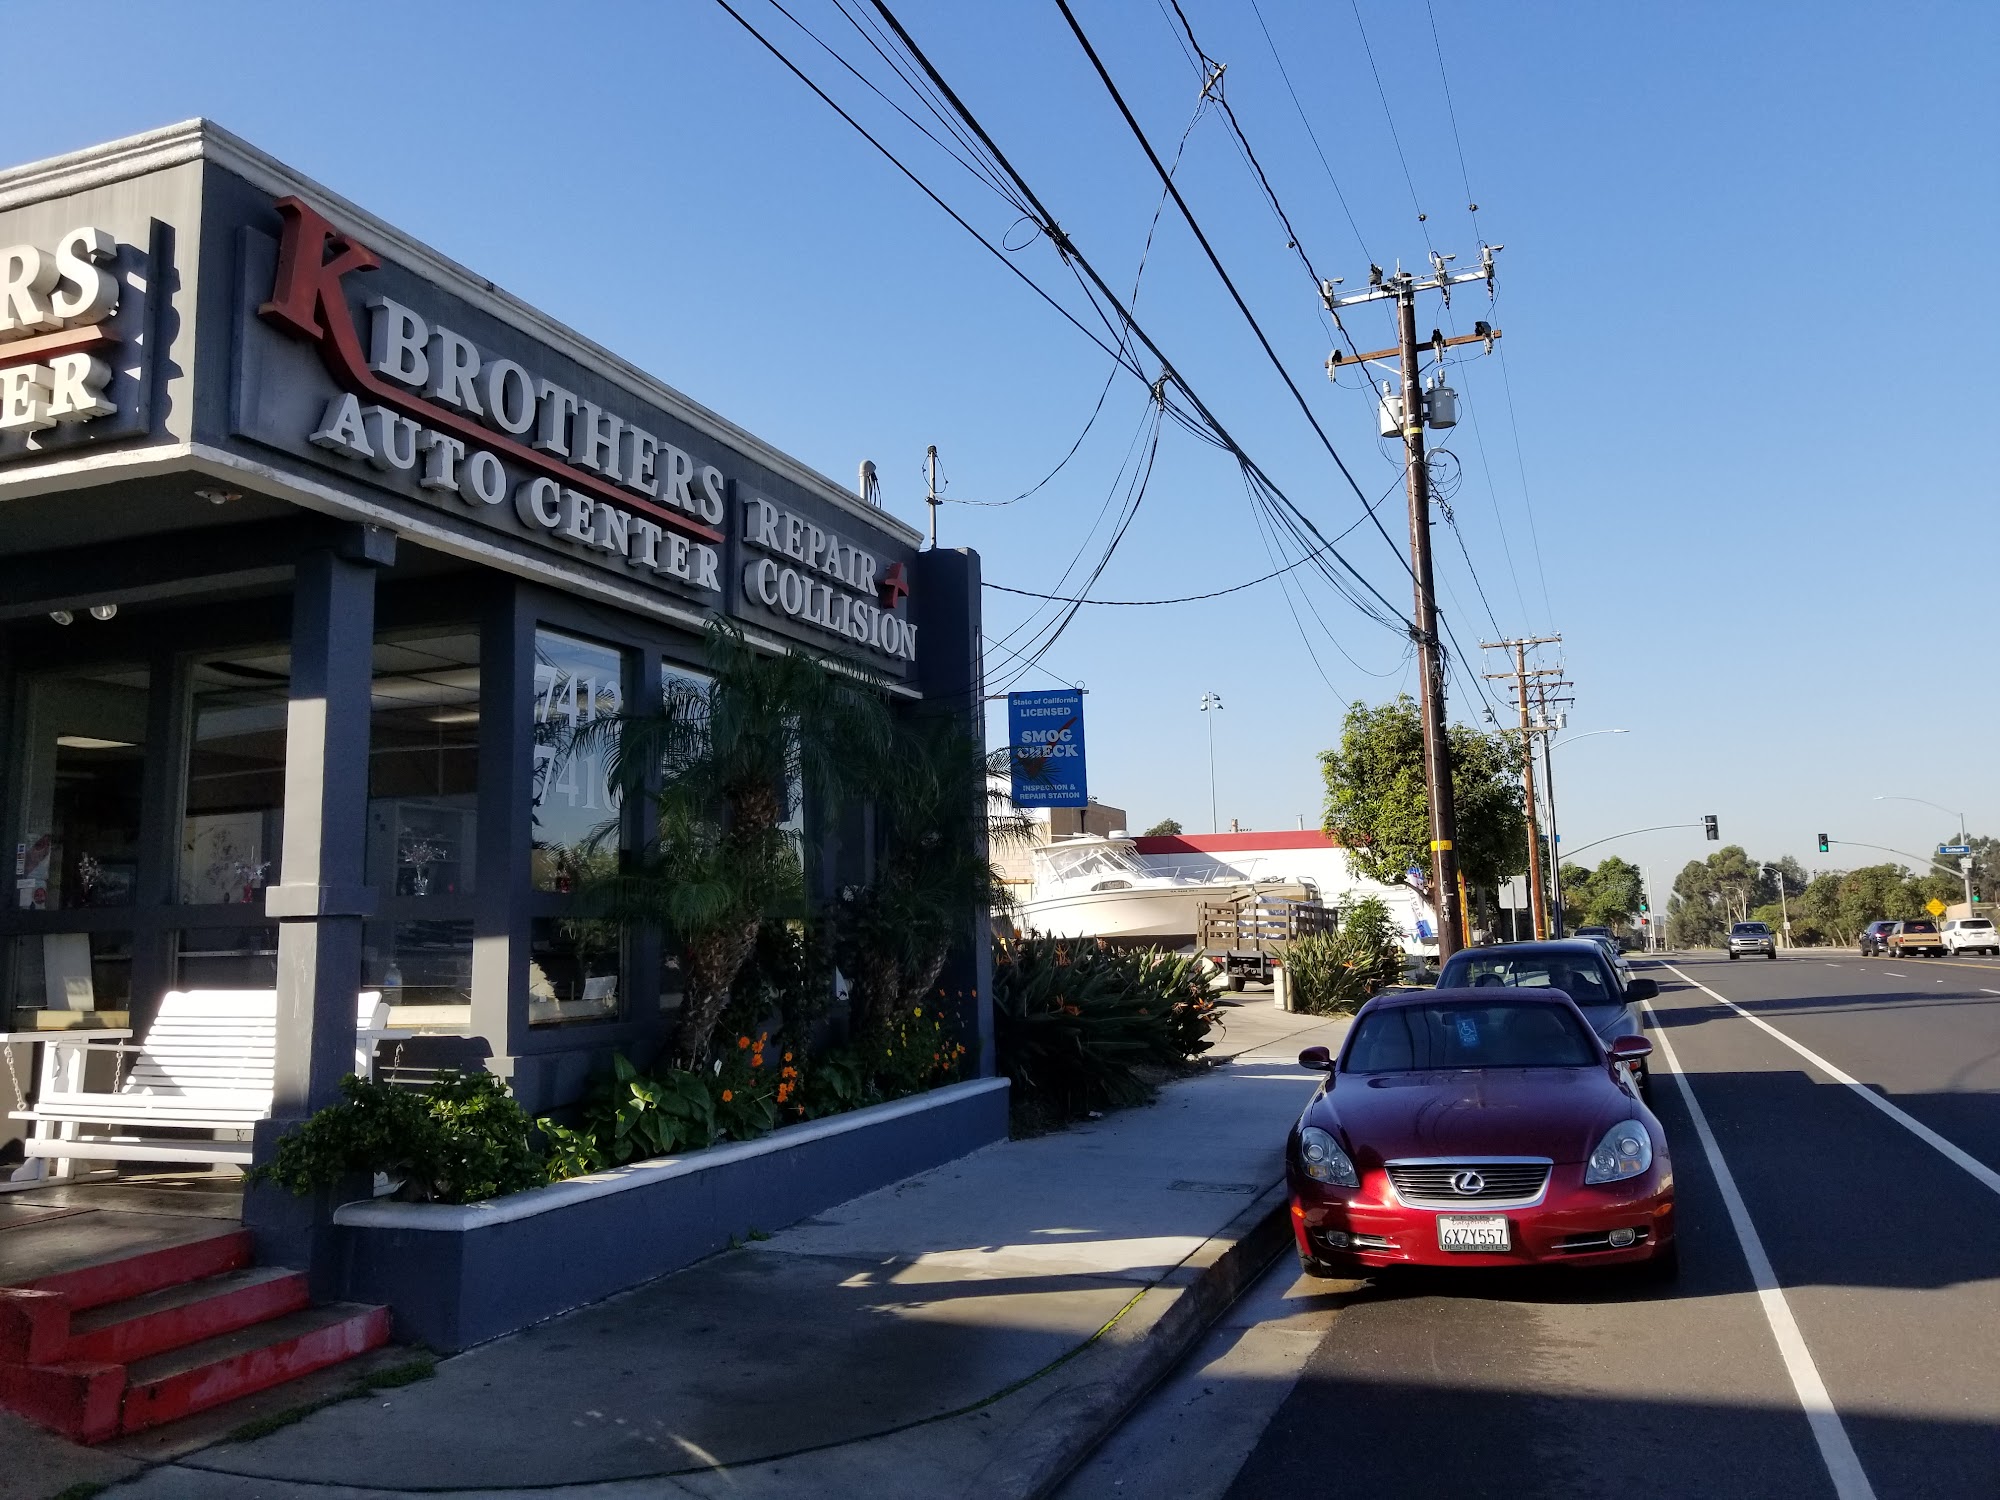 K Brothers Auto Center